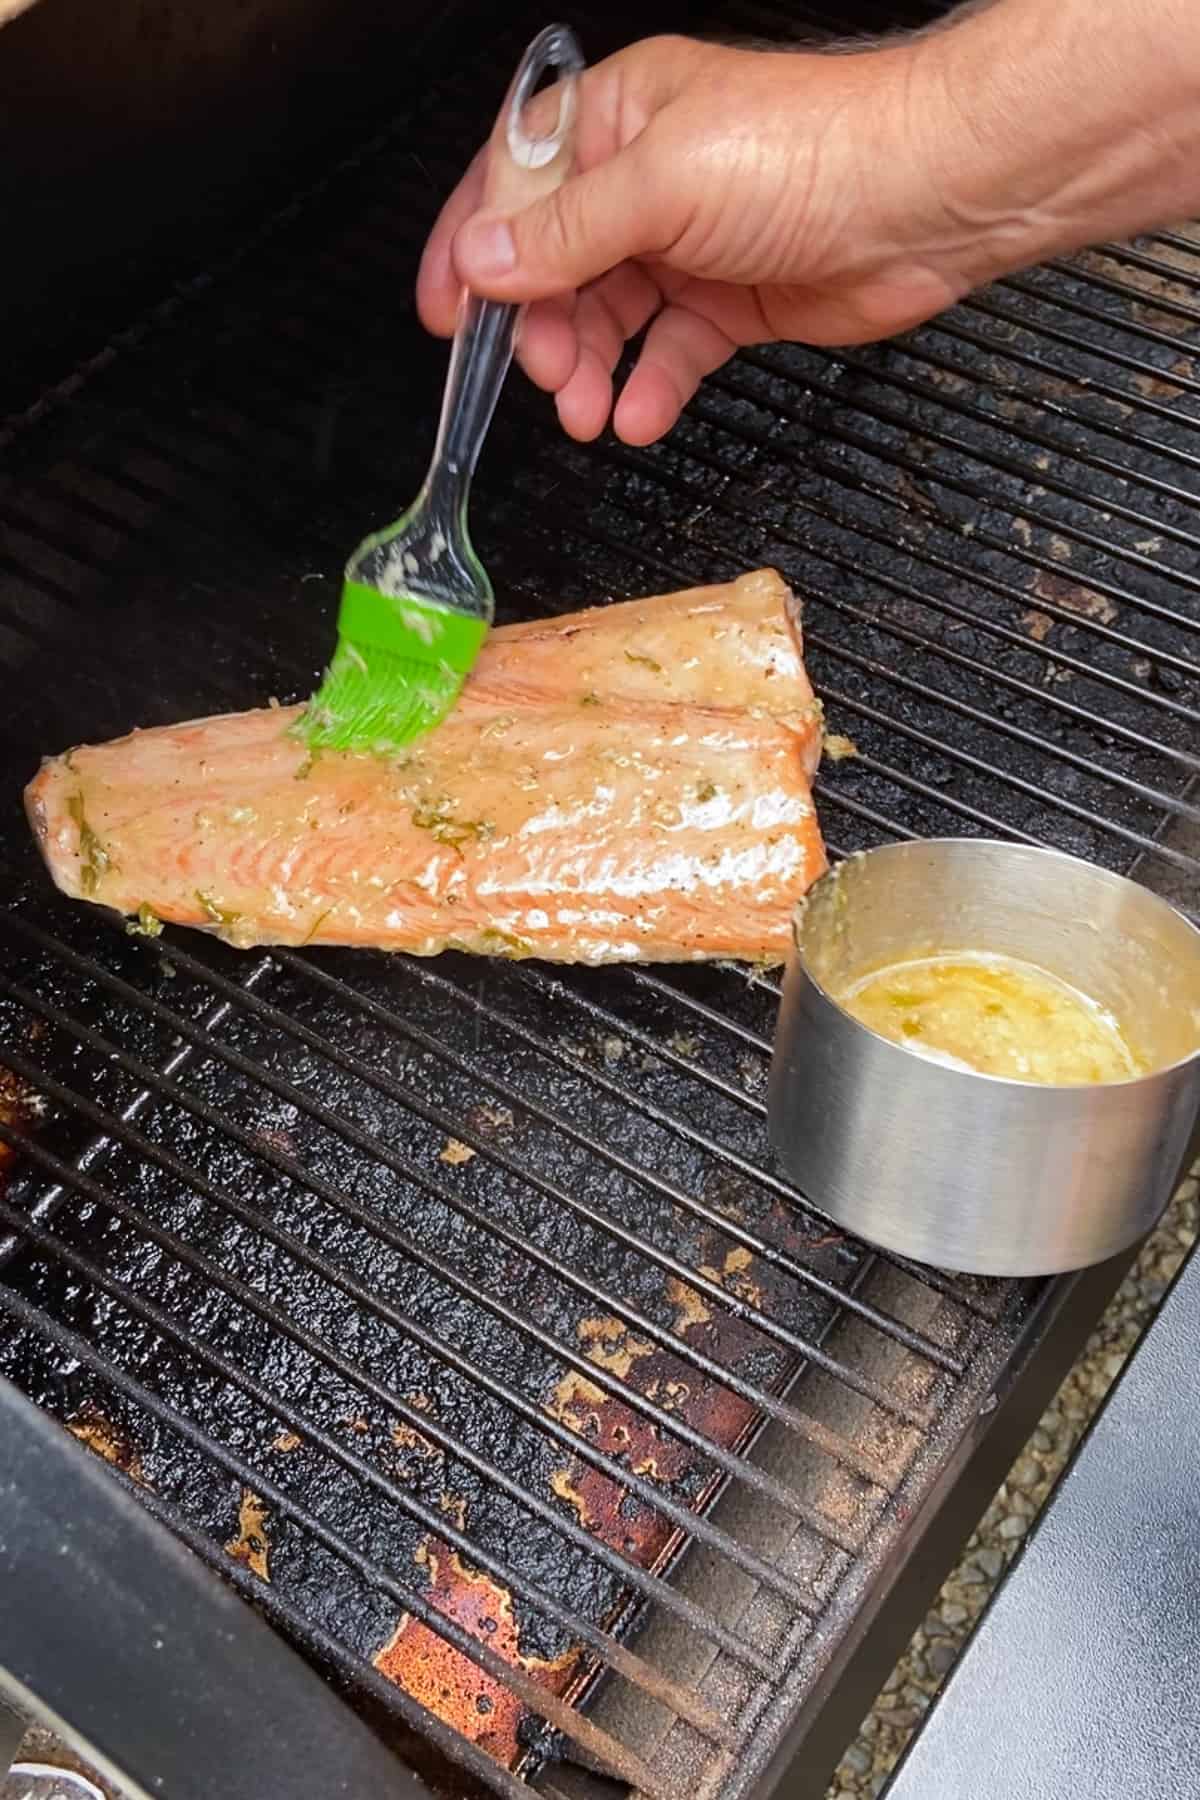 Brushing a butter sauce onto a large fillet of fish on a grill.